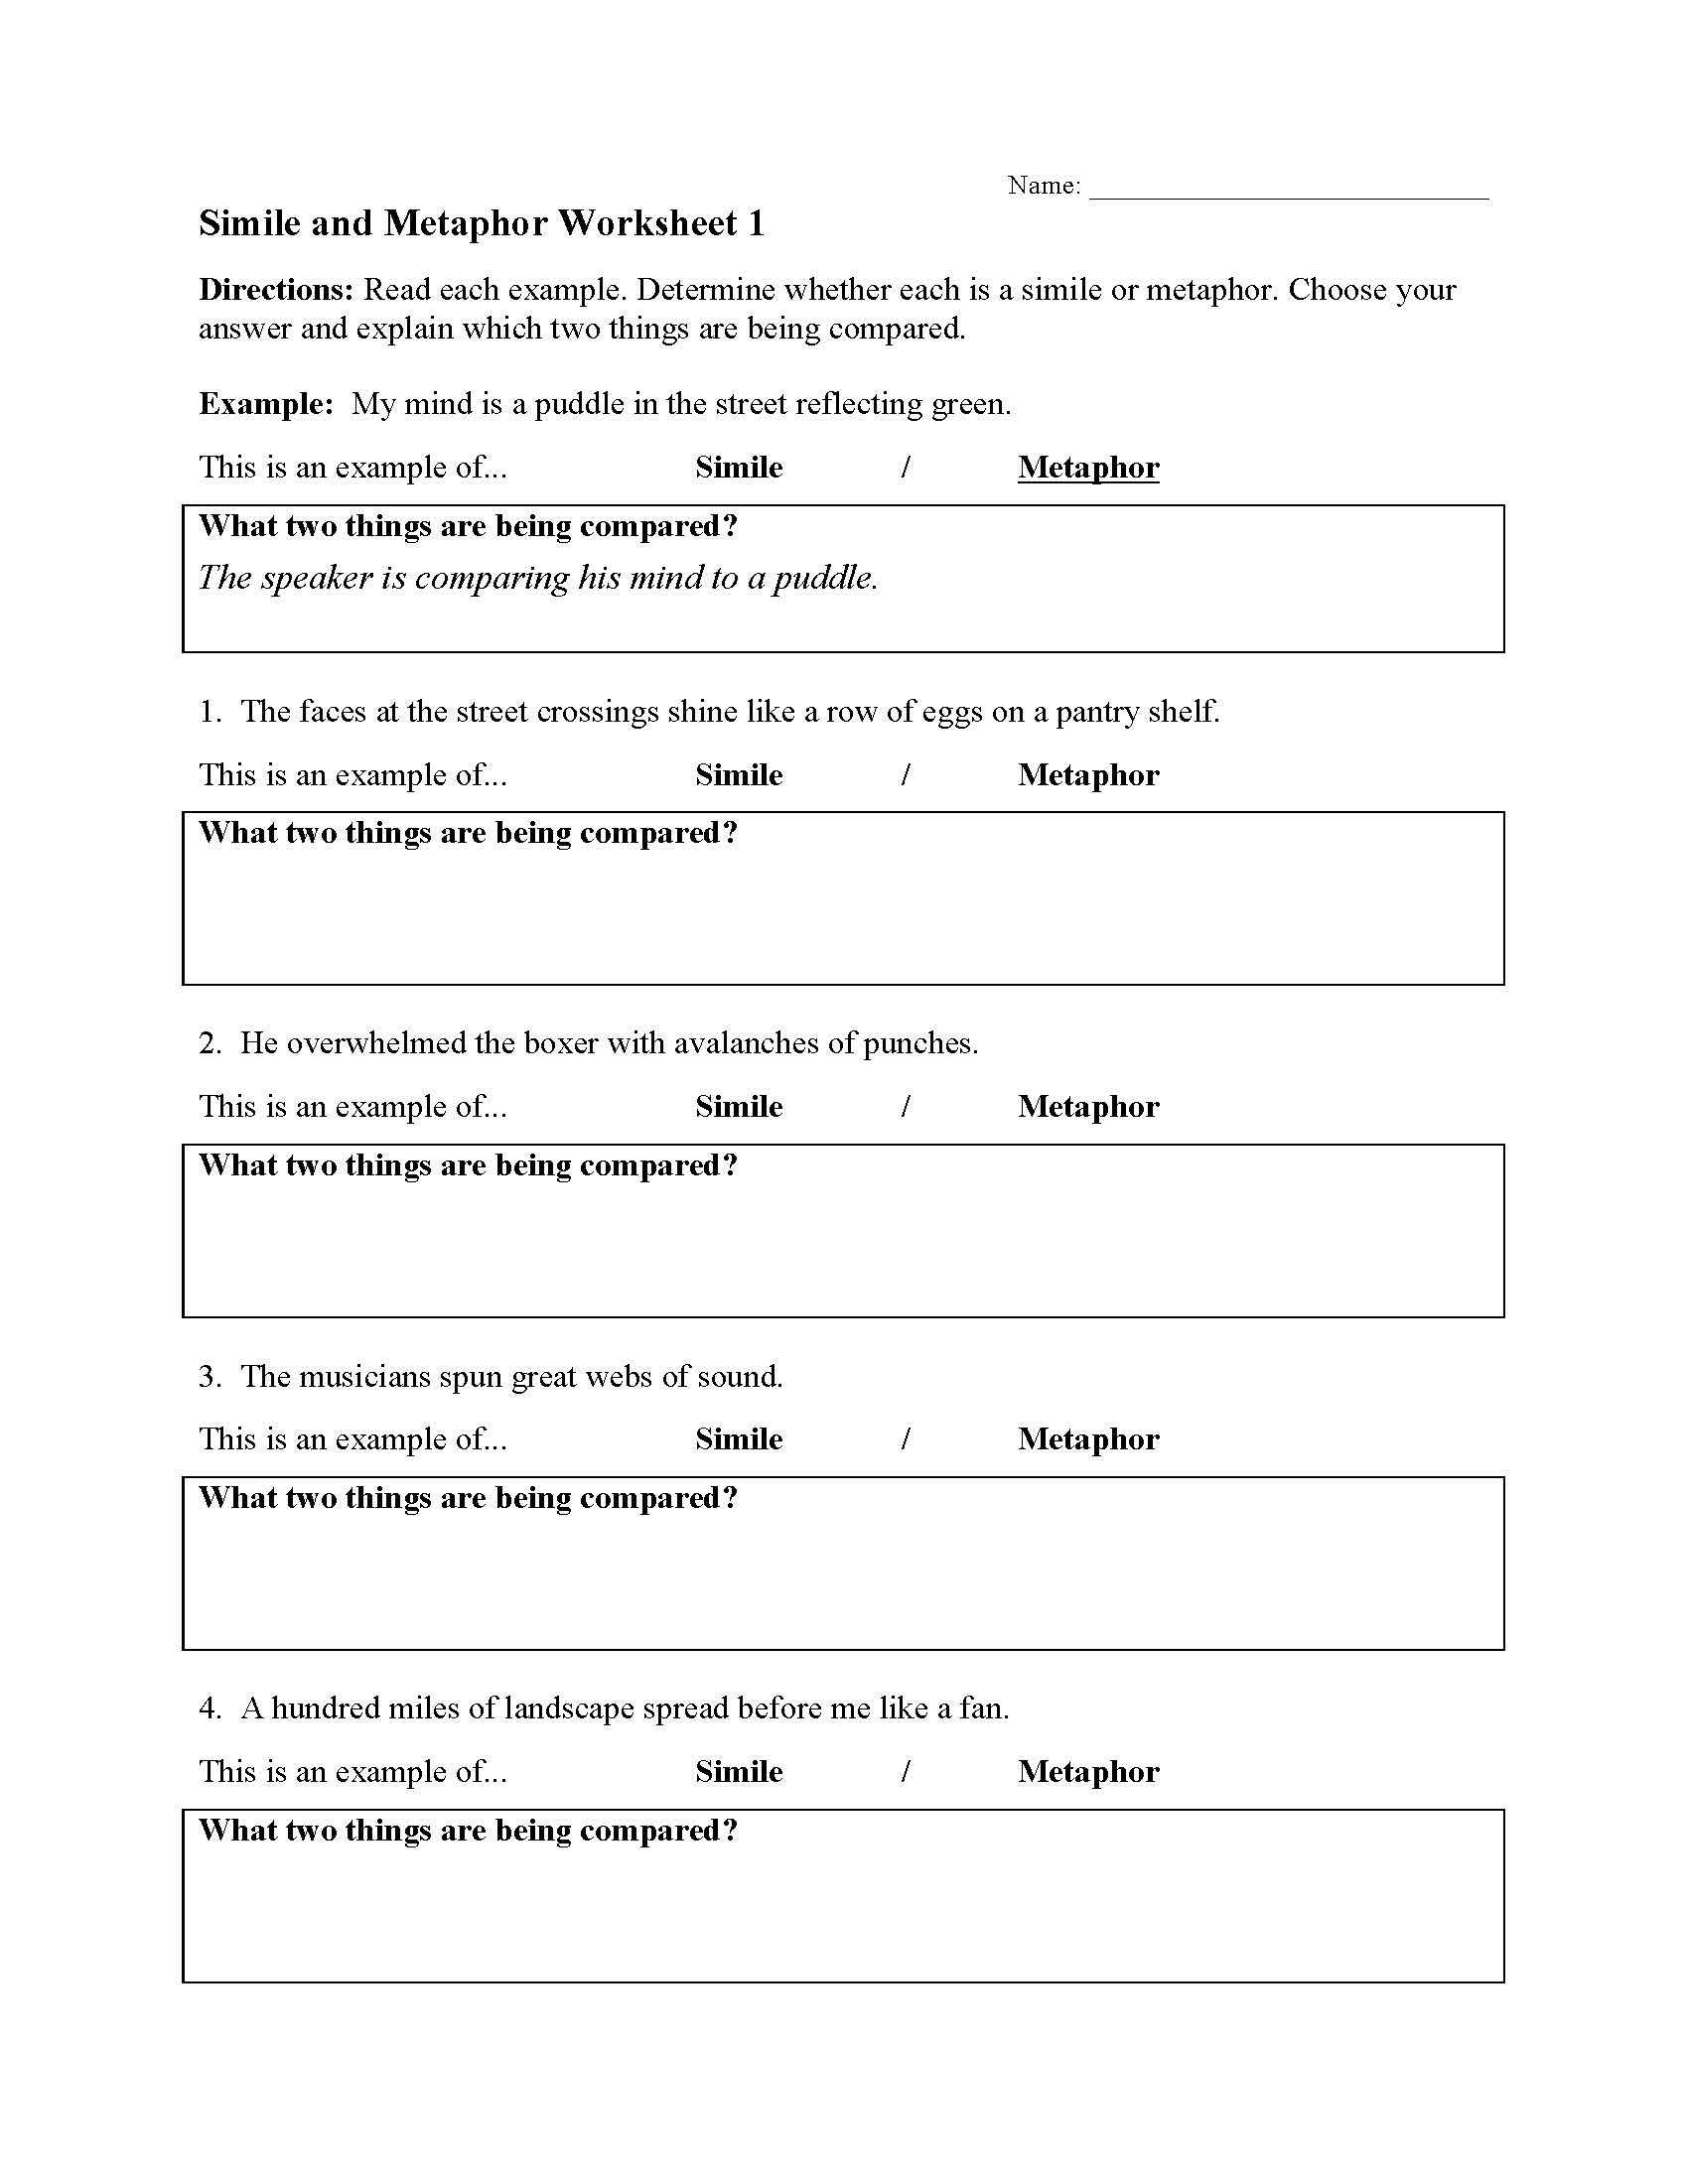 This is a preview image of Simile and Metaphor Worksheet 1. Click on it to enlarge it or view the source file.